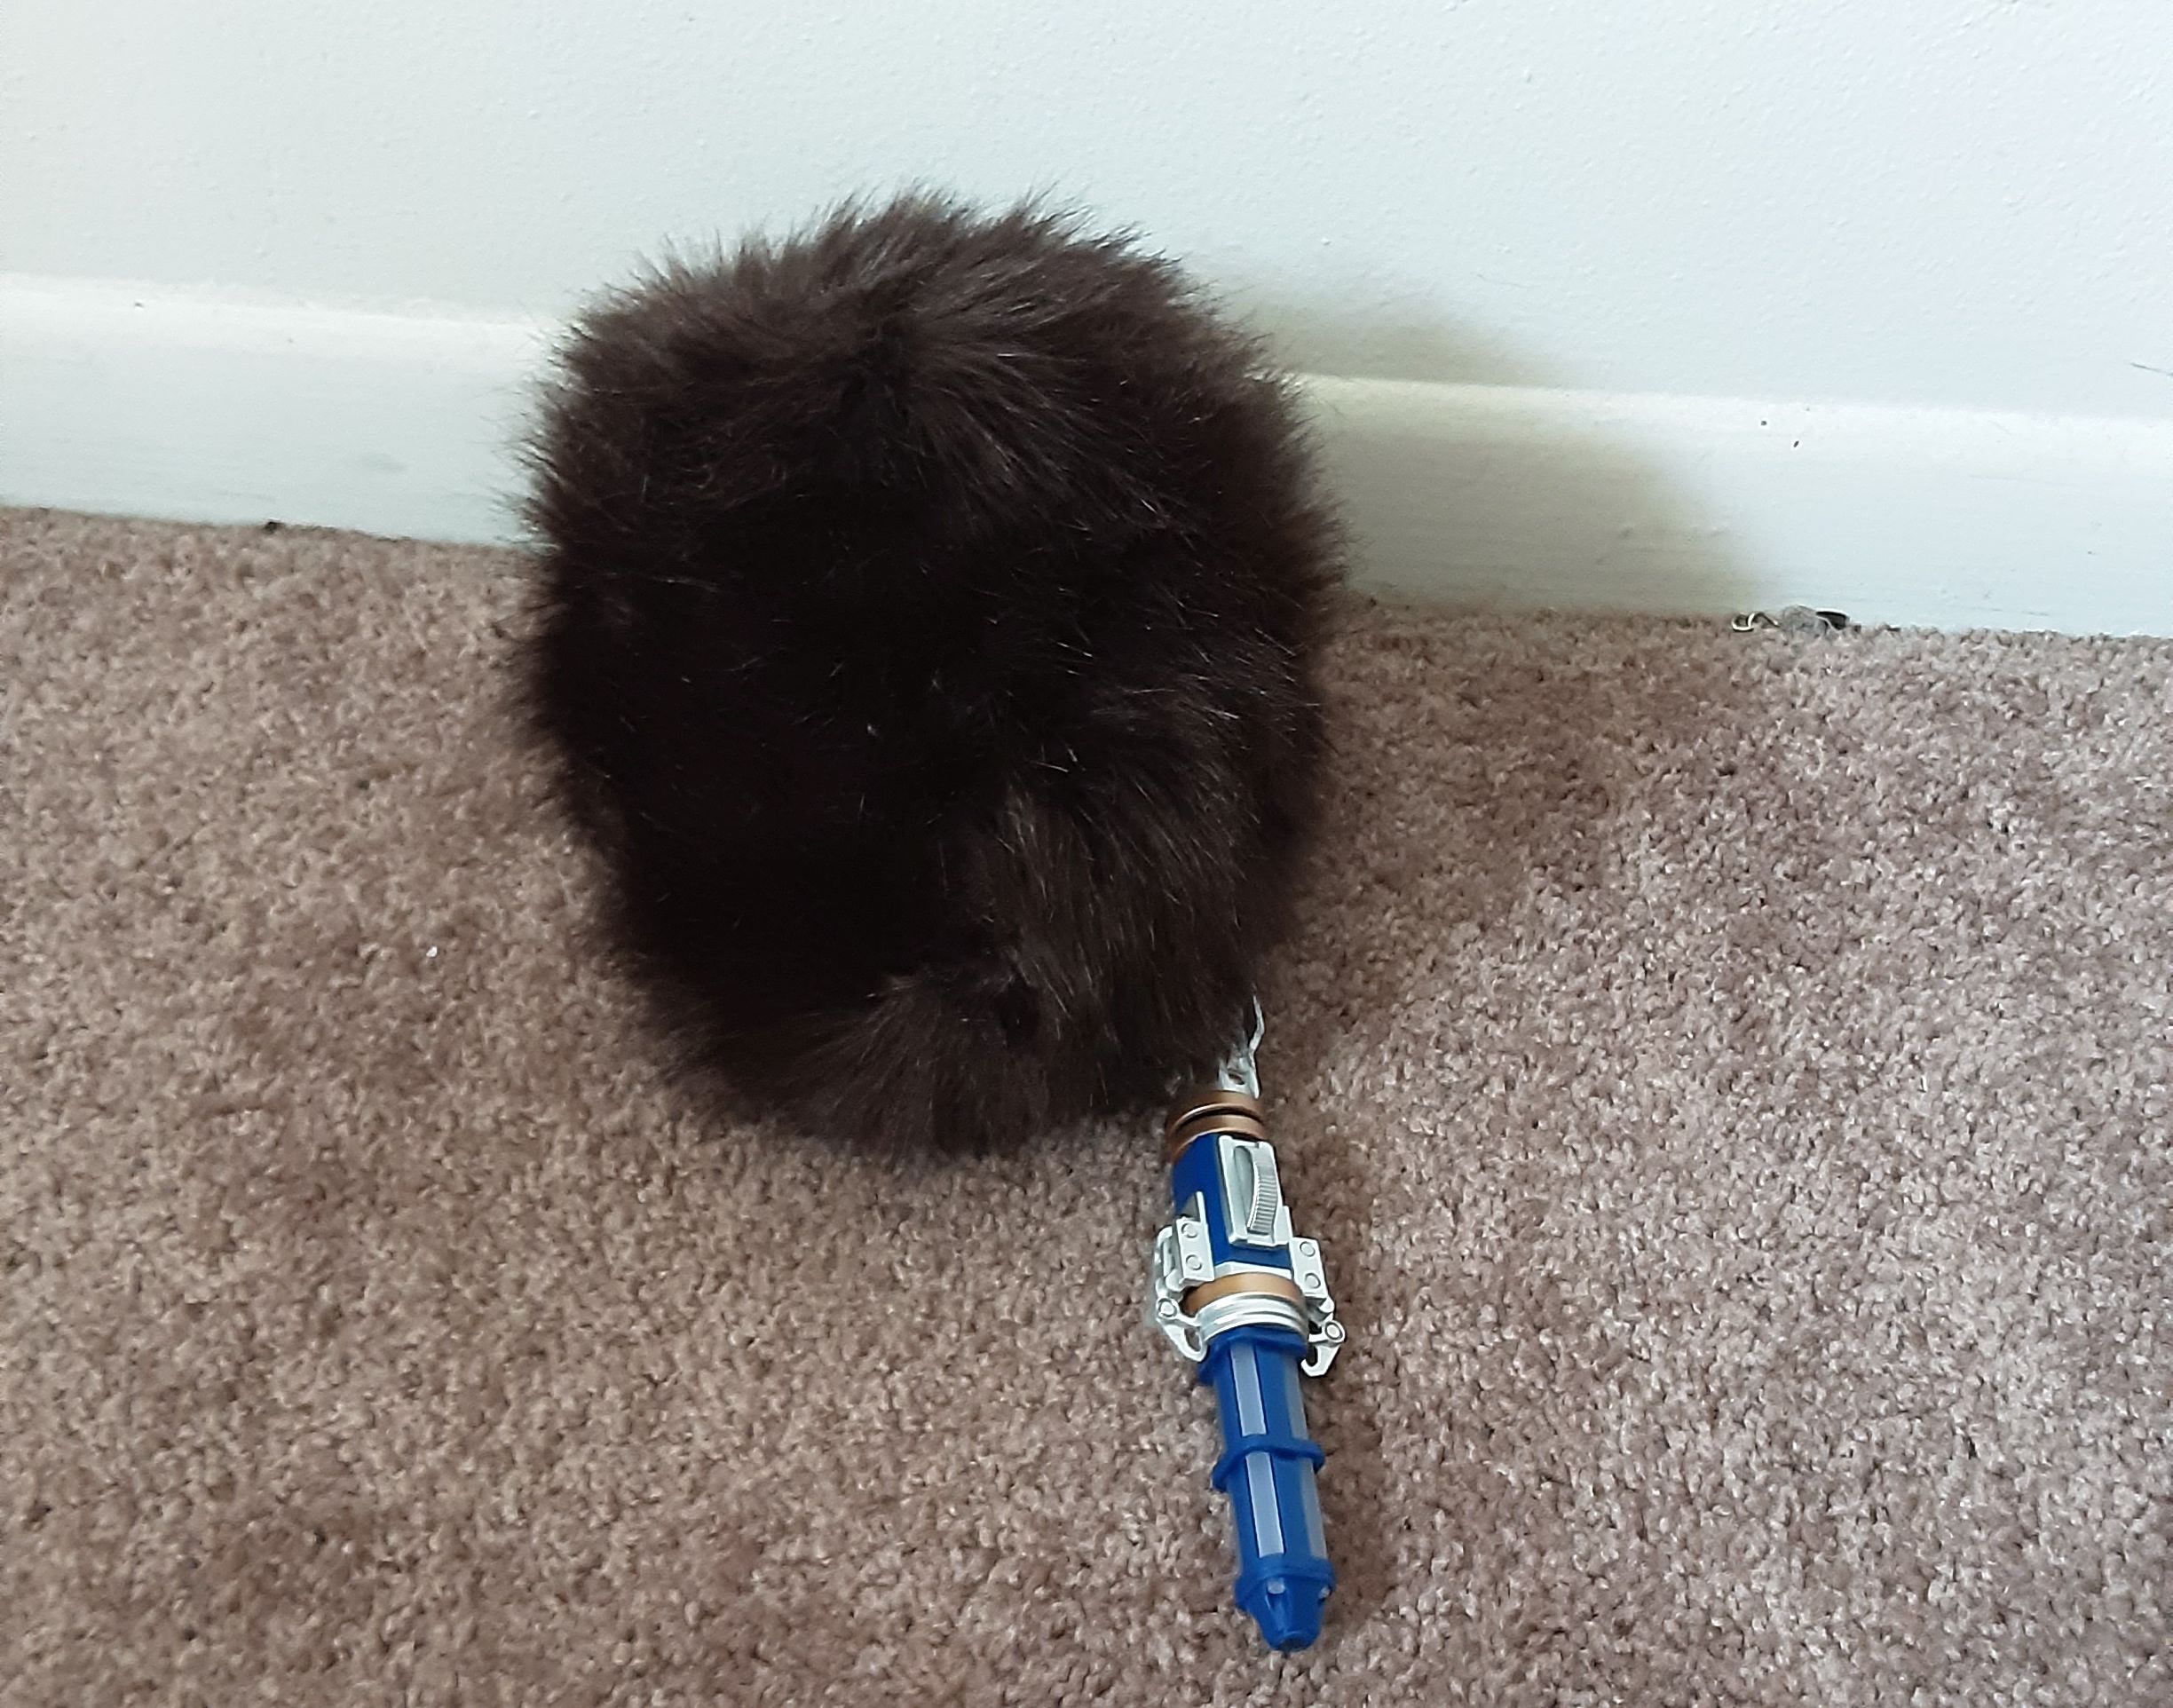 New tribble